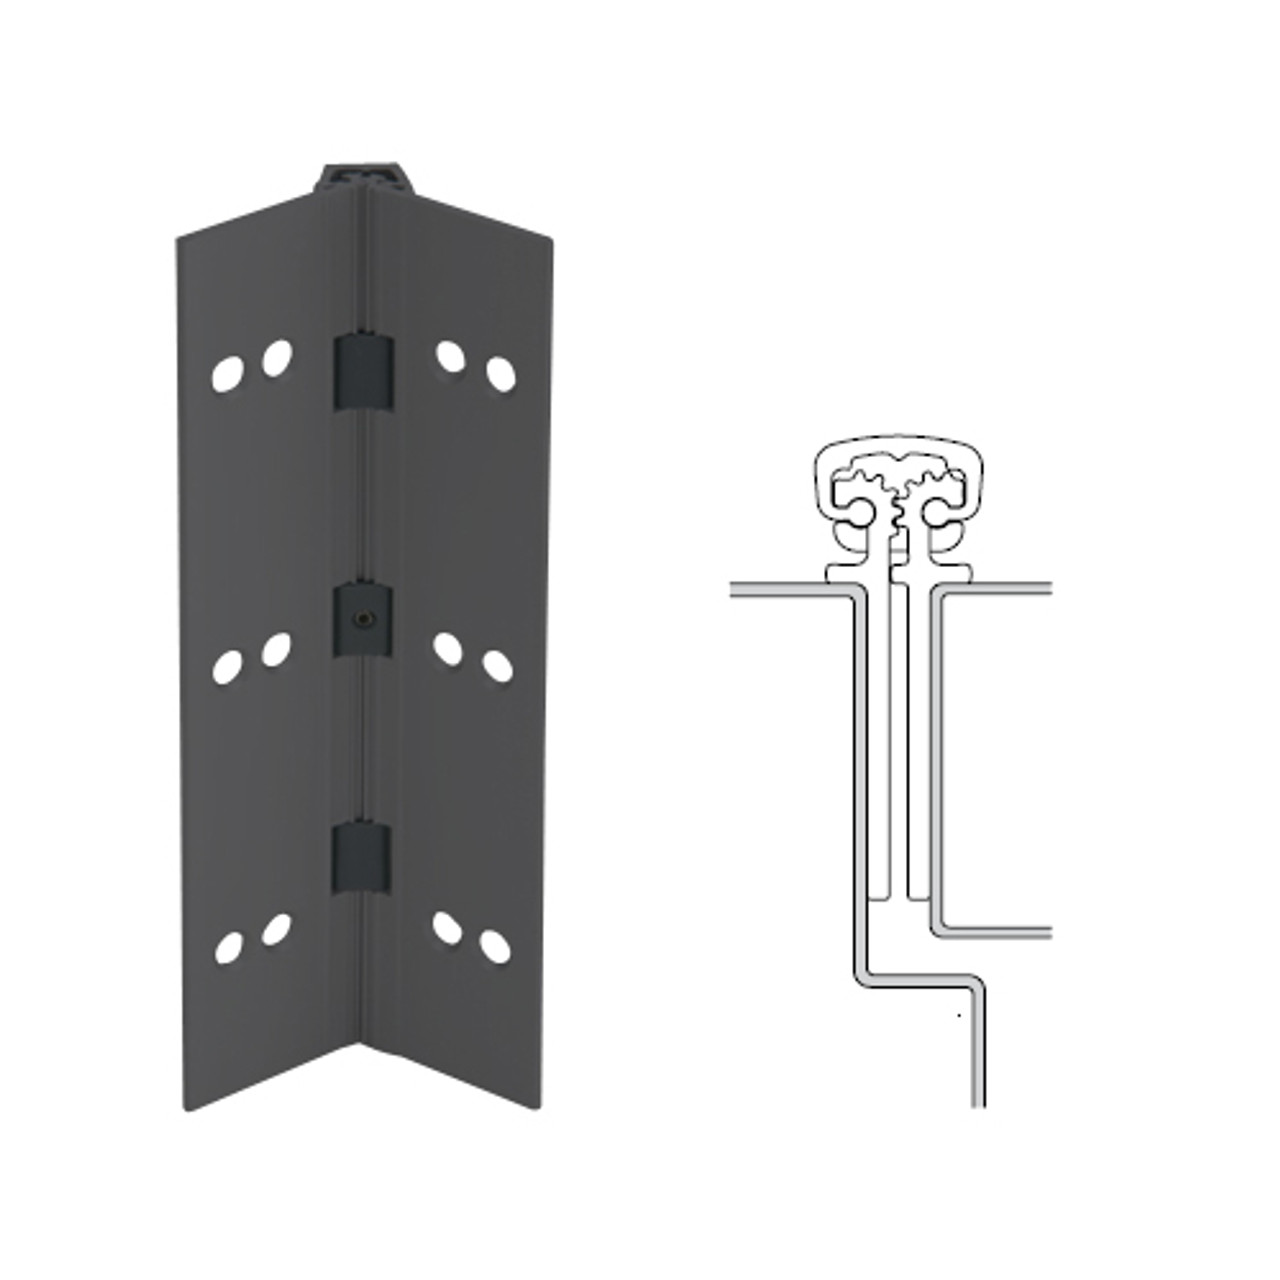 112XY-315AN-120-SECWDHM IVES Full Mortise Continuous Geared Hinges with Security Screws - Hex Pin Drive in Anodized Black